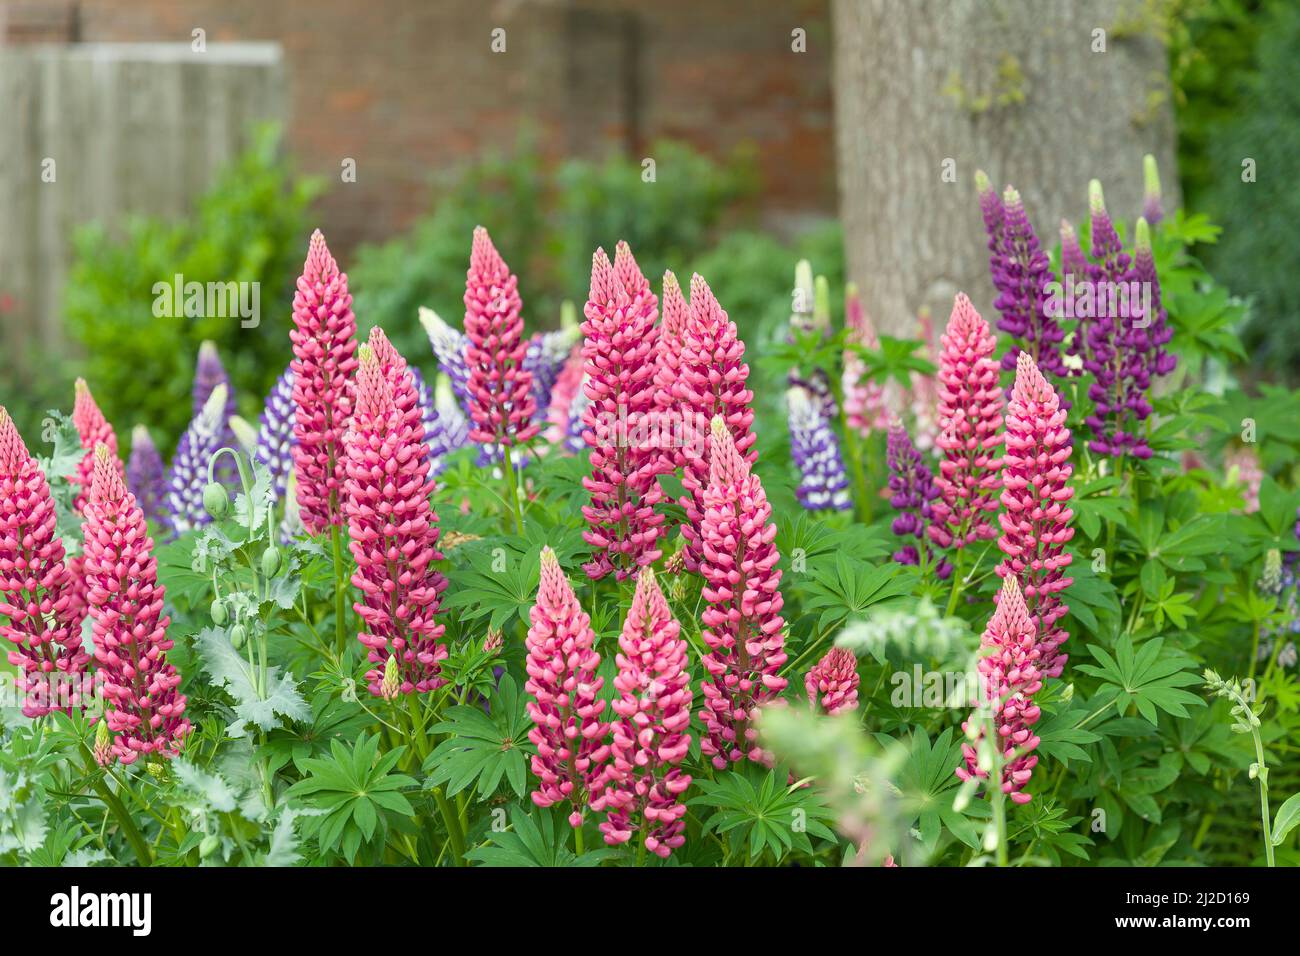 Lupin or lupine plant with pink flowers growing in a UK garden border Stock Photo